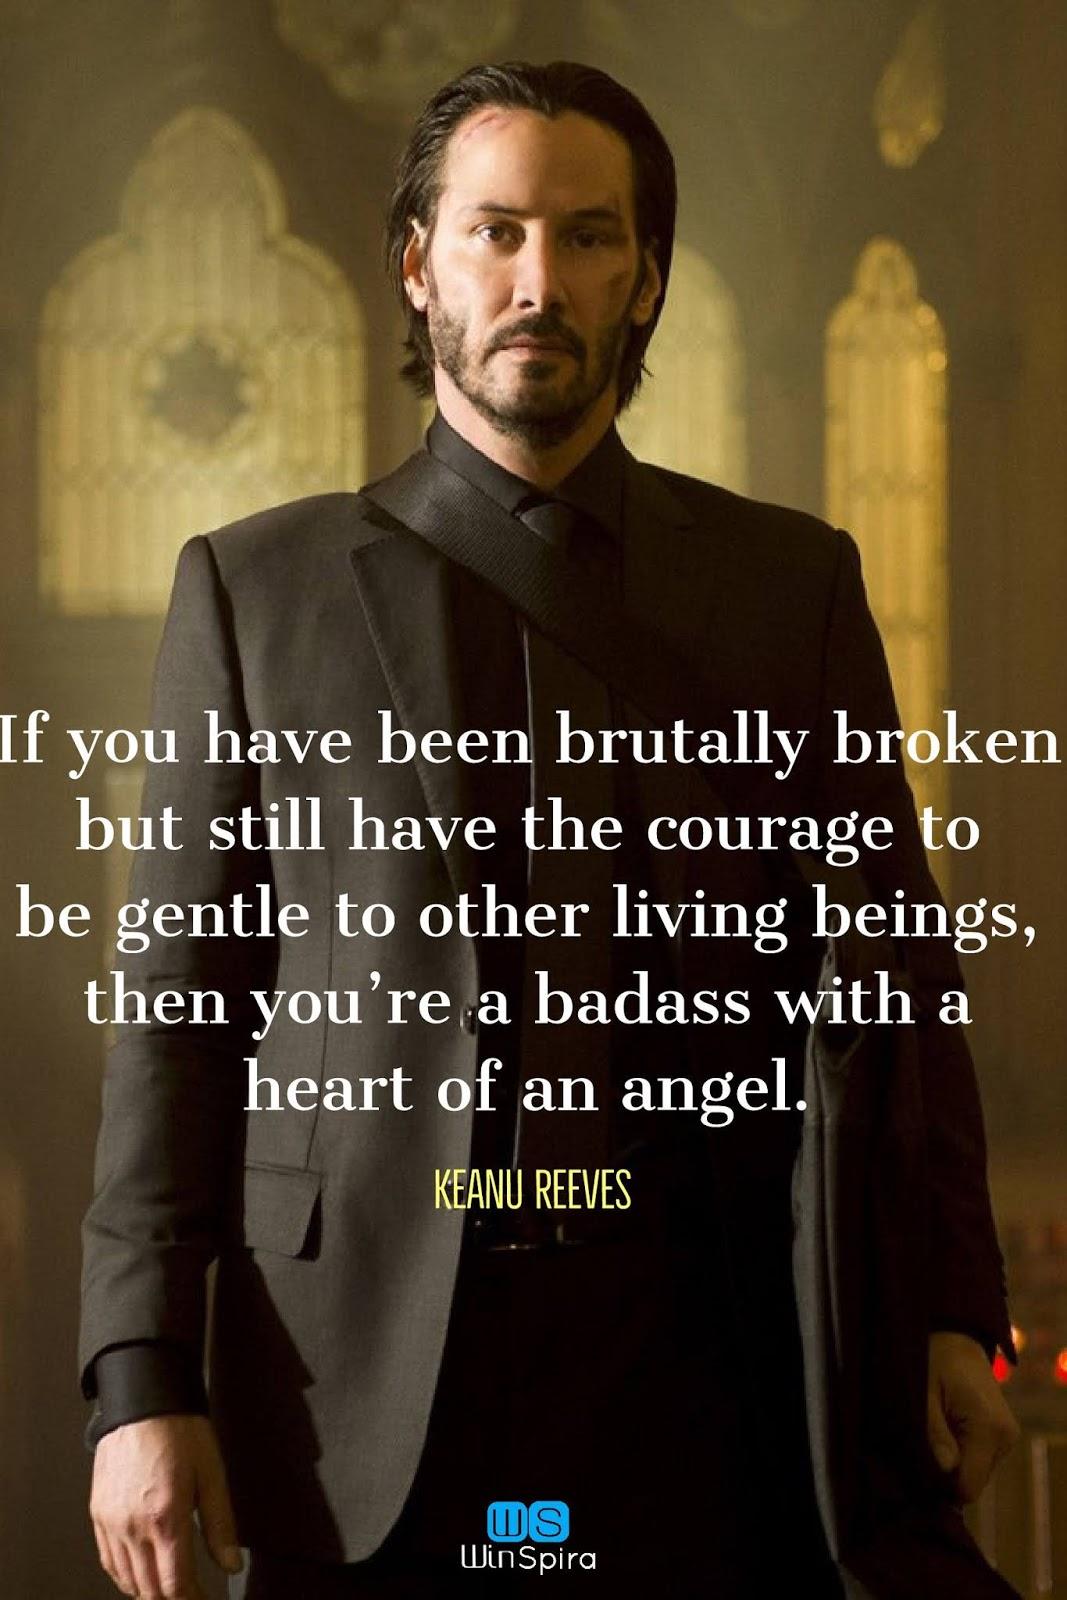 John Wick Quotes Wallpapers - Wallpaper Cave - Image 2